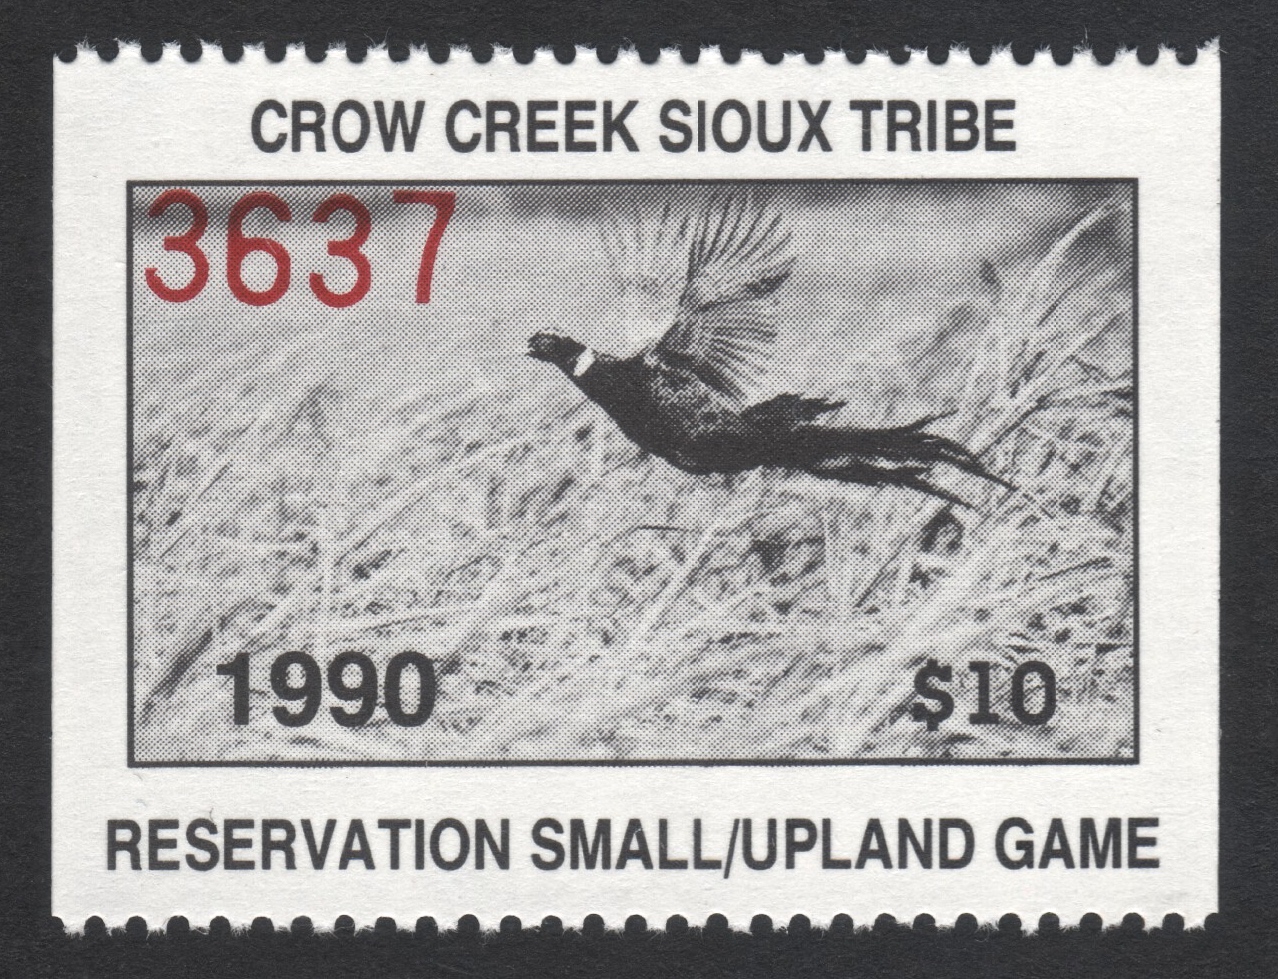 1990 Crow Creek Reservation Small/Upland Game